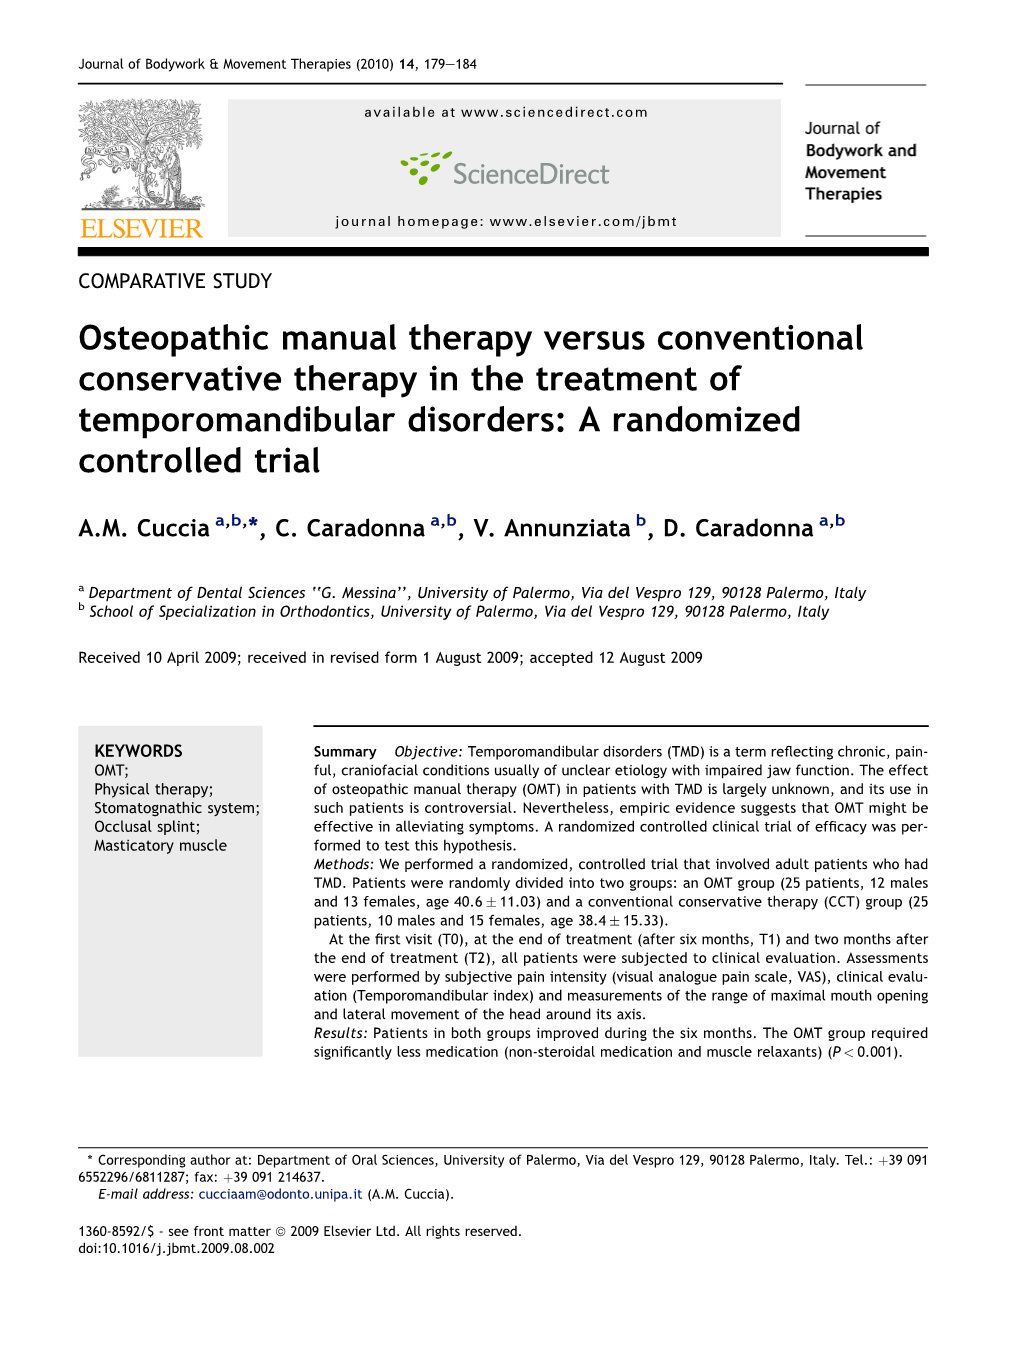 Osteopathic Manual Therapy Versus Conventional Conservative Therapy in the Treatment of Temporomandibular Disorders: a Randomized Controlled Trial